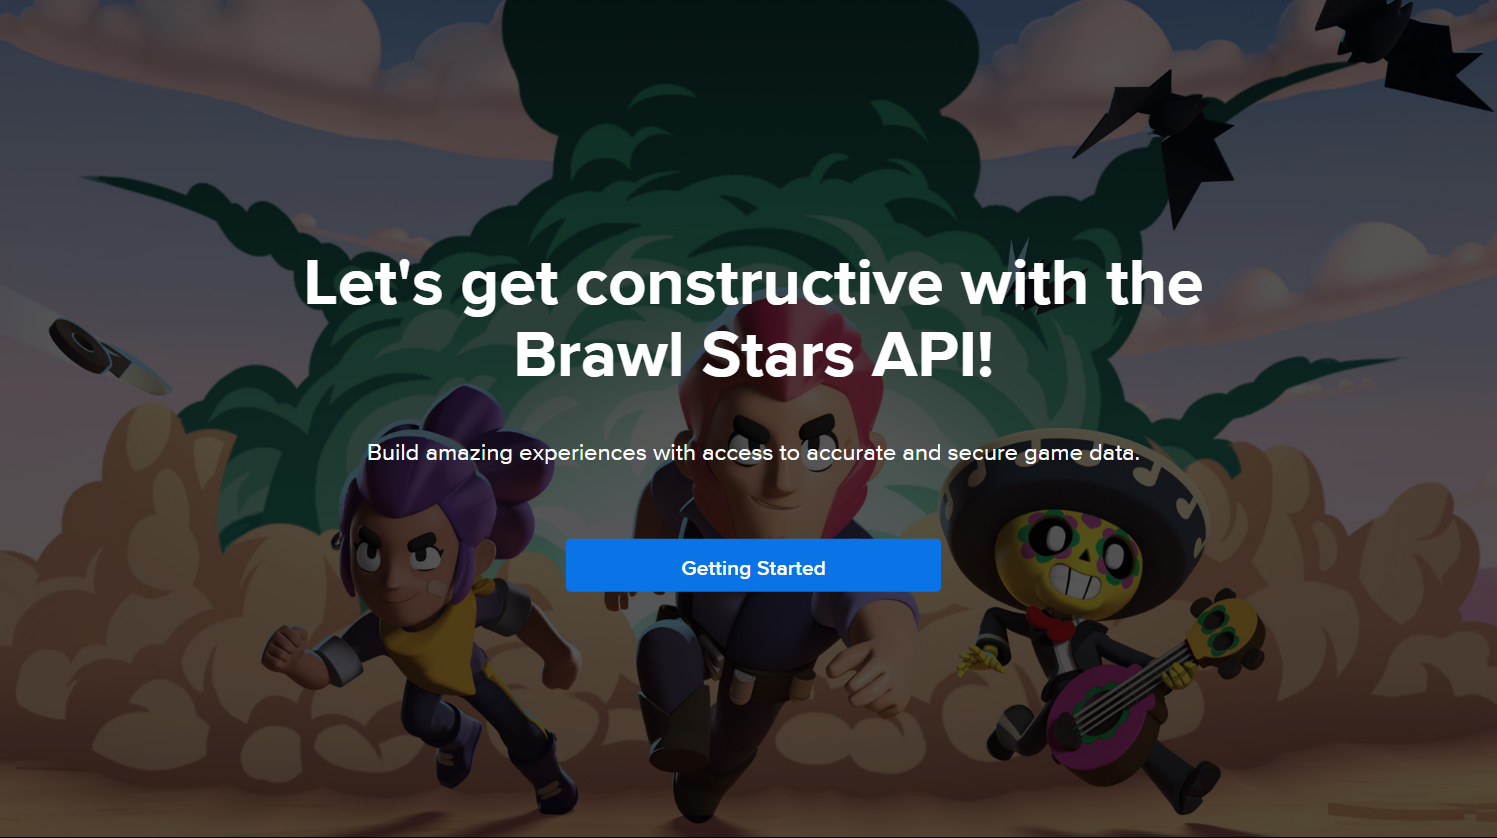 Let's get constructive with the Brawl Stars API